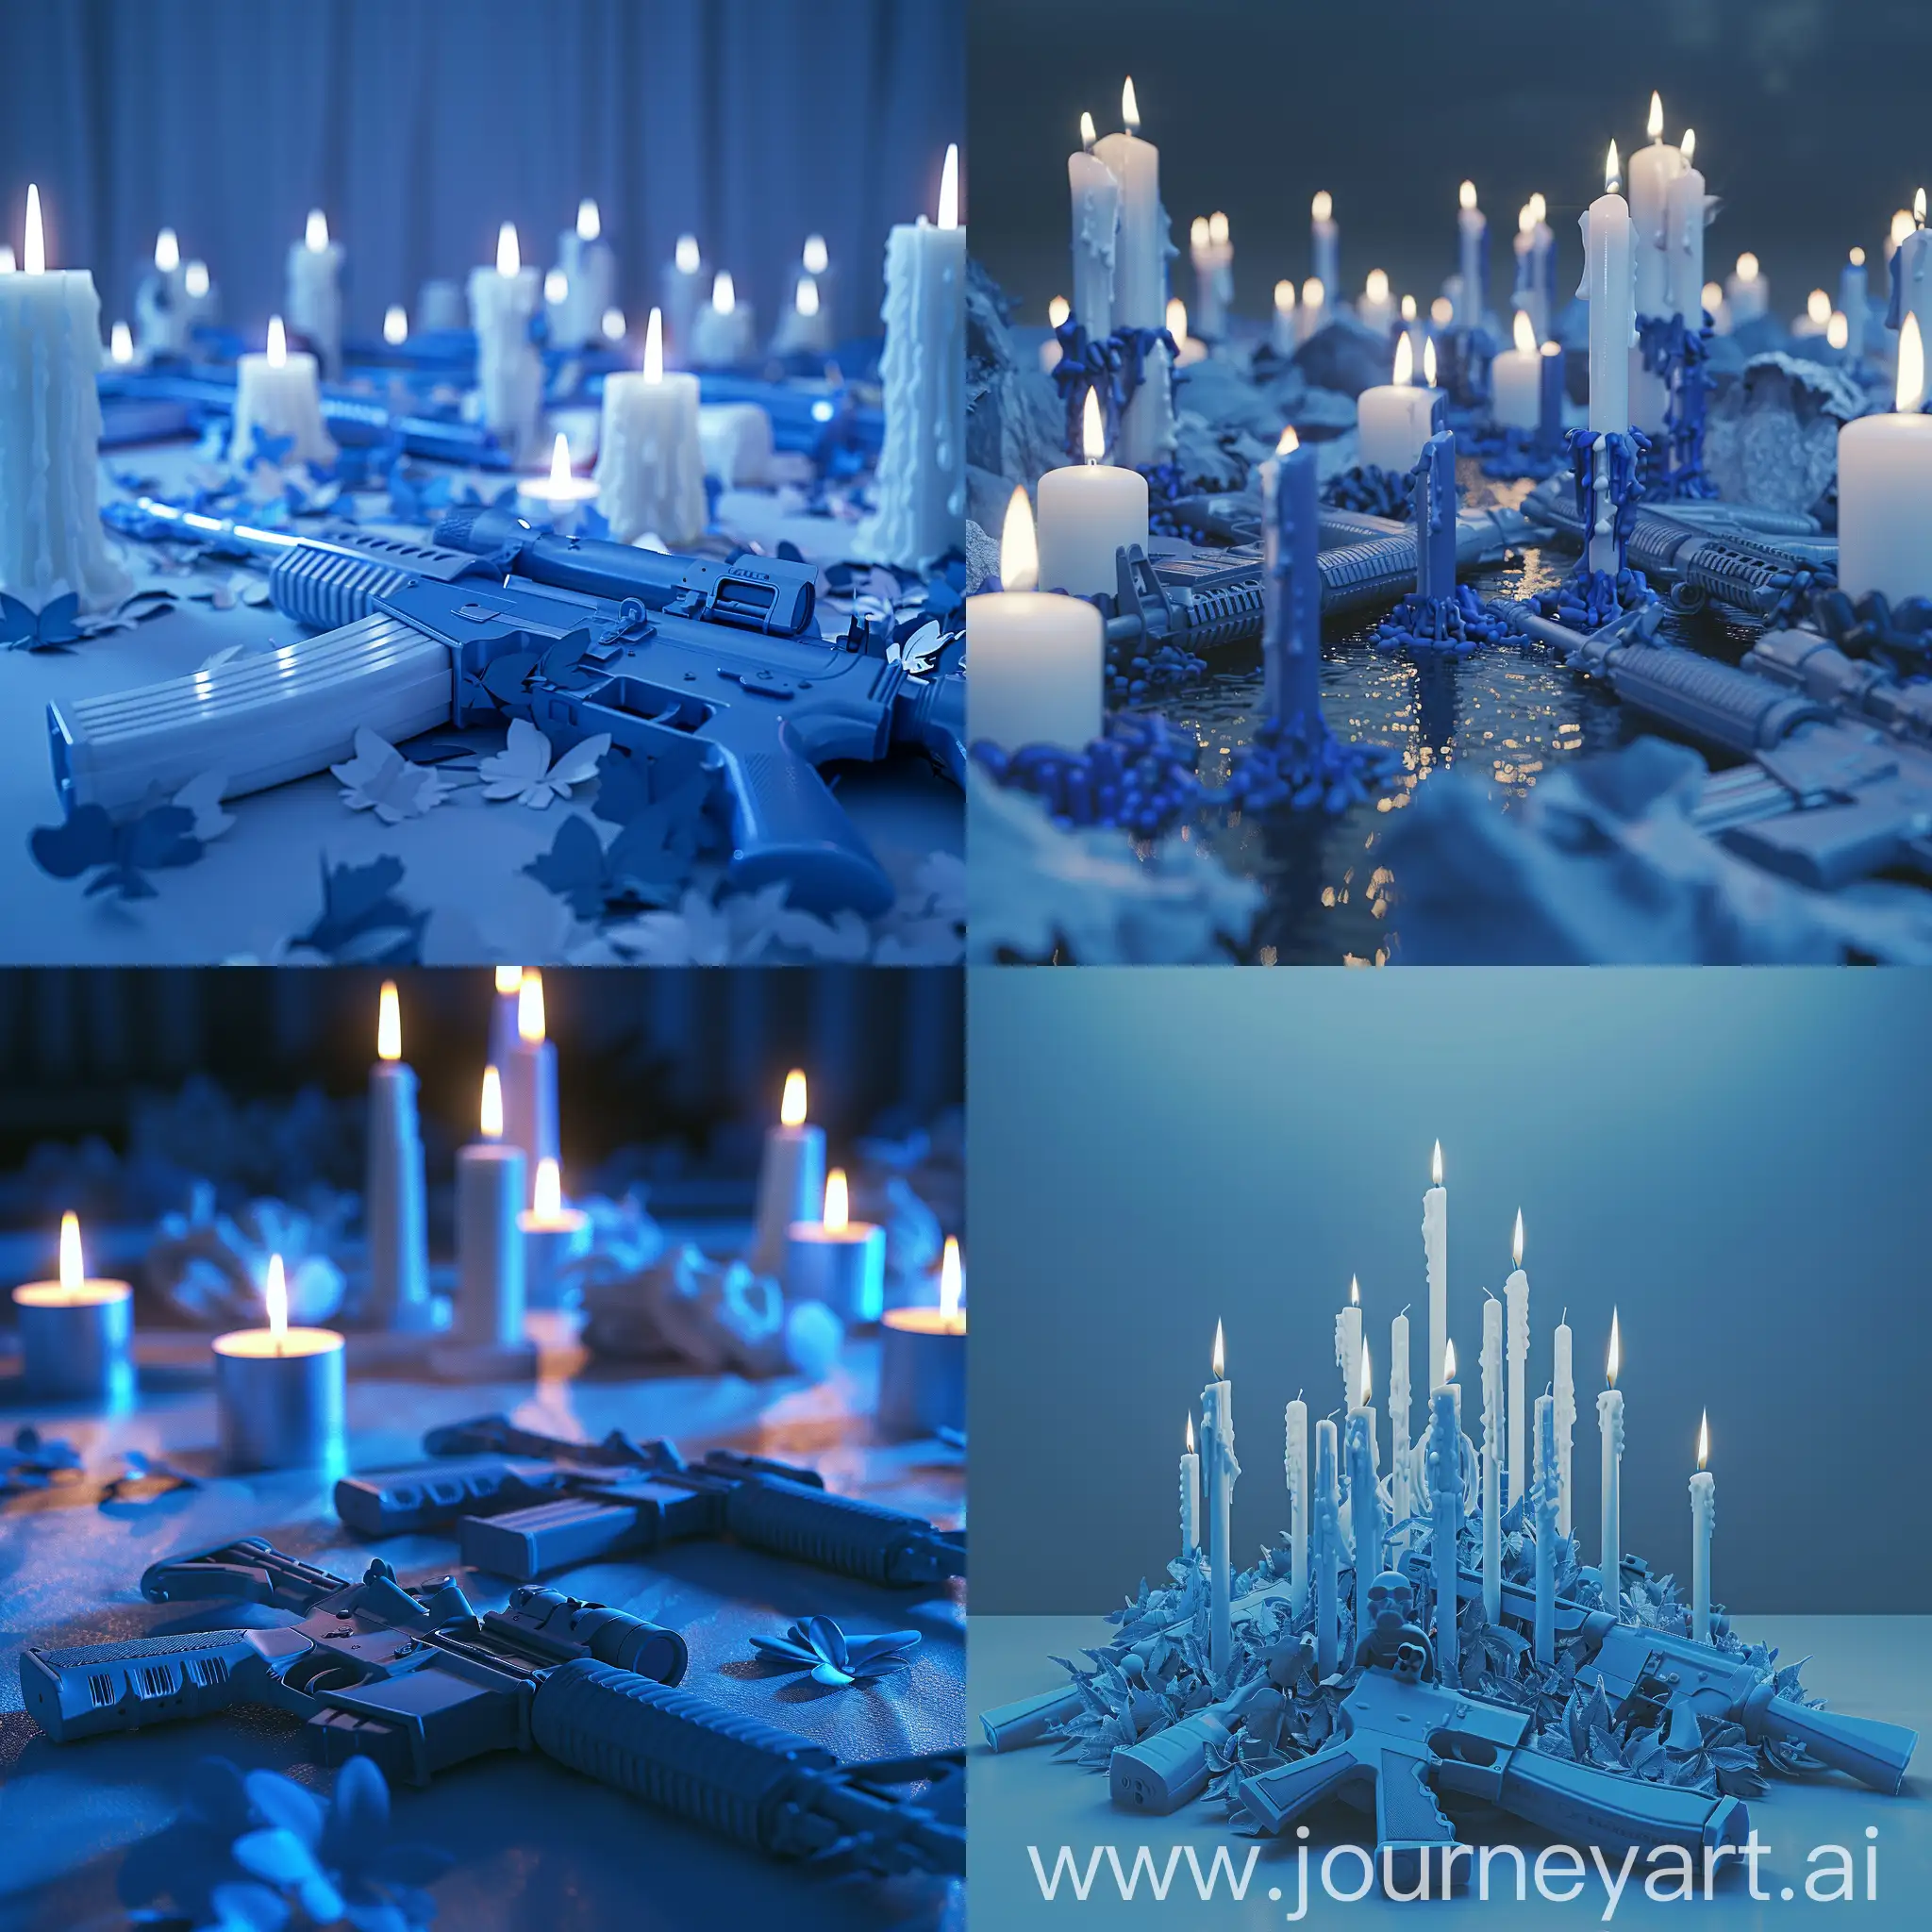 War-Music-Poster-Symbolic-Composition-in-Blue-and-White-with-Guns-Candles-and-a-Message-of-Hope